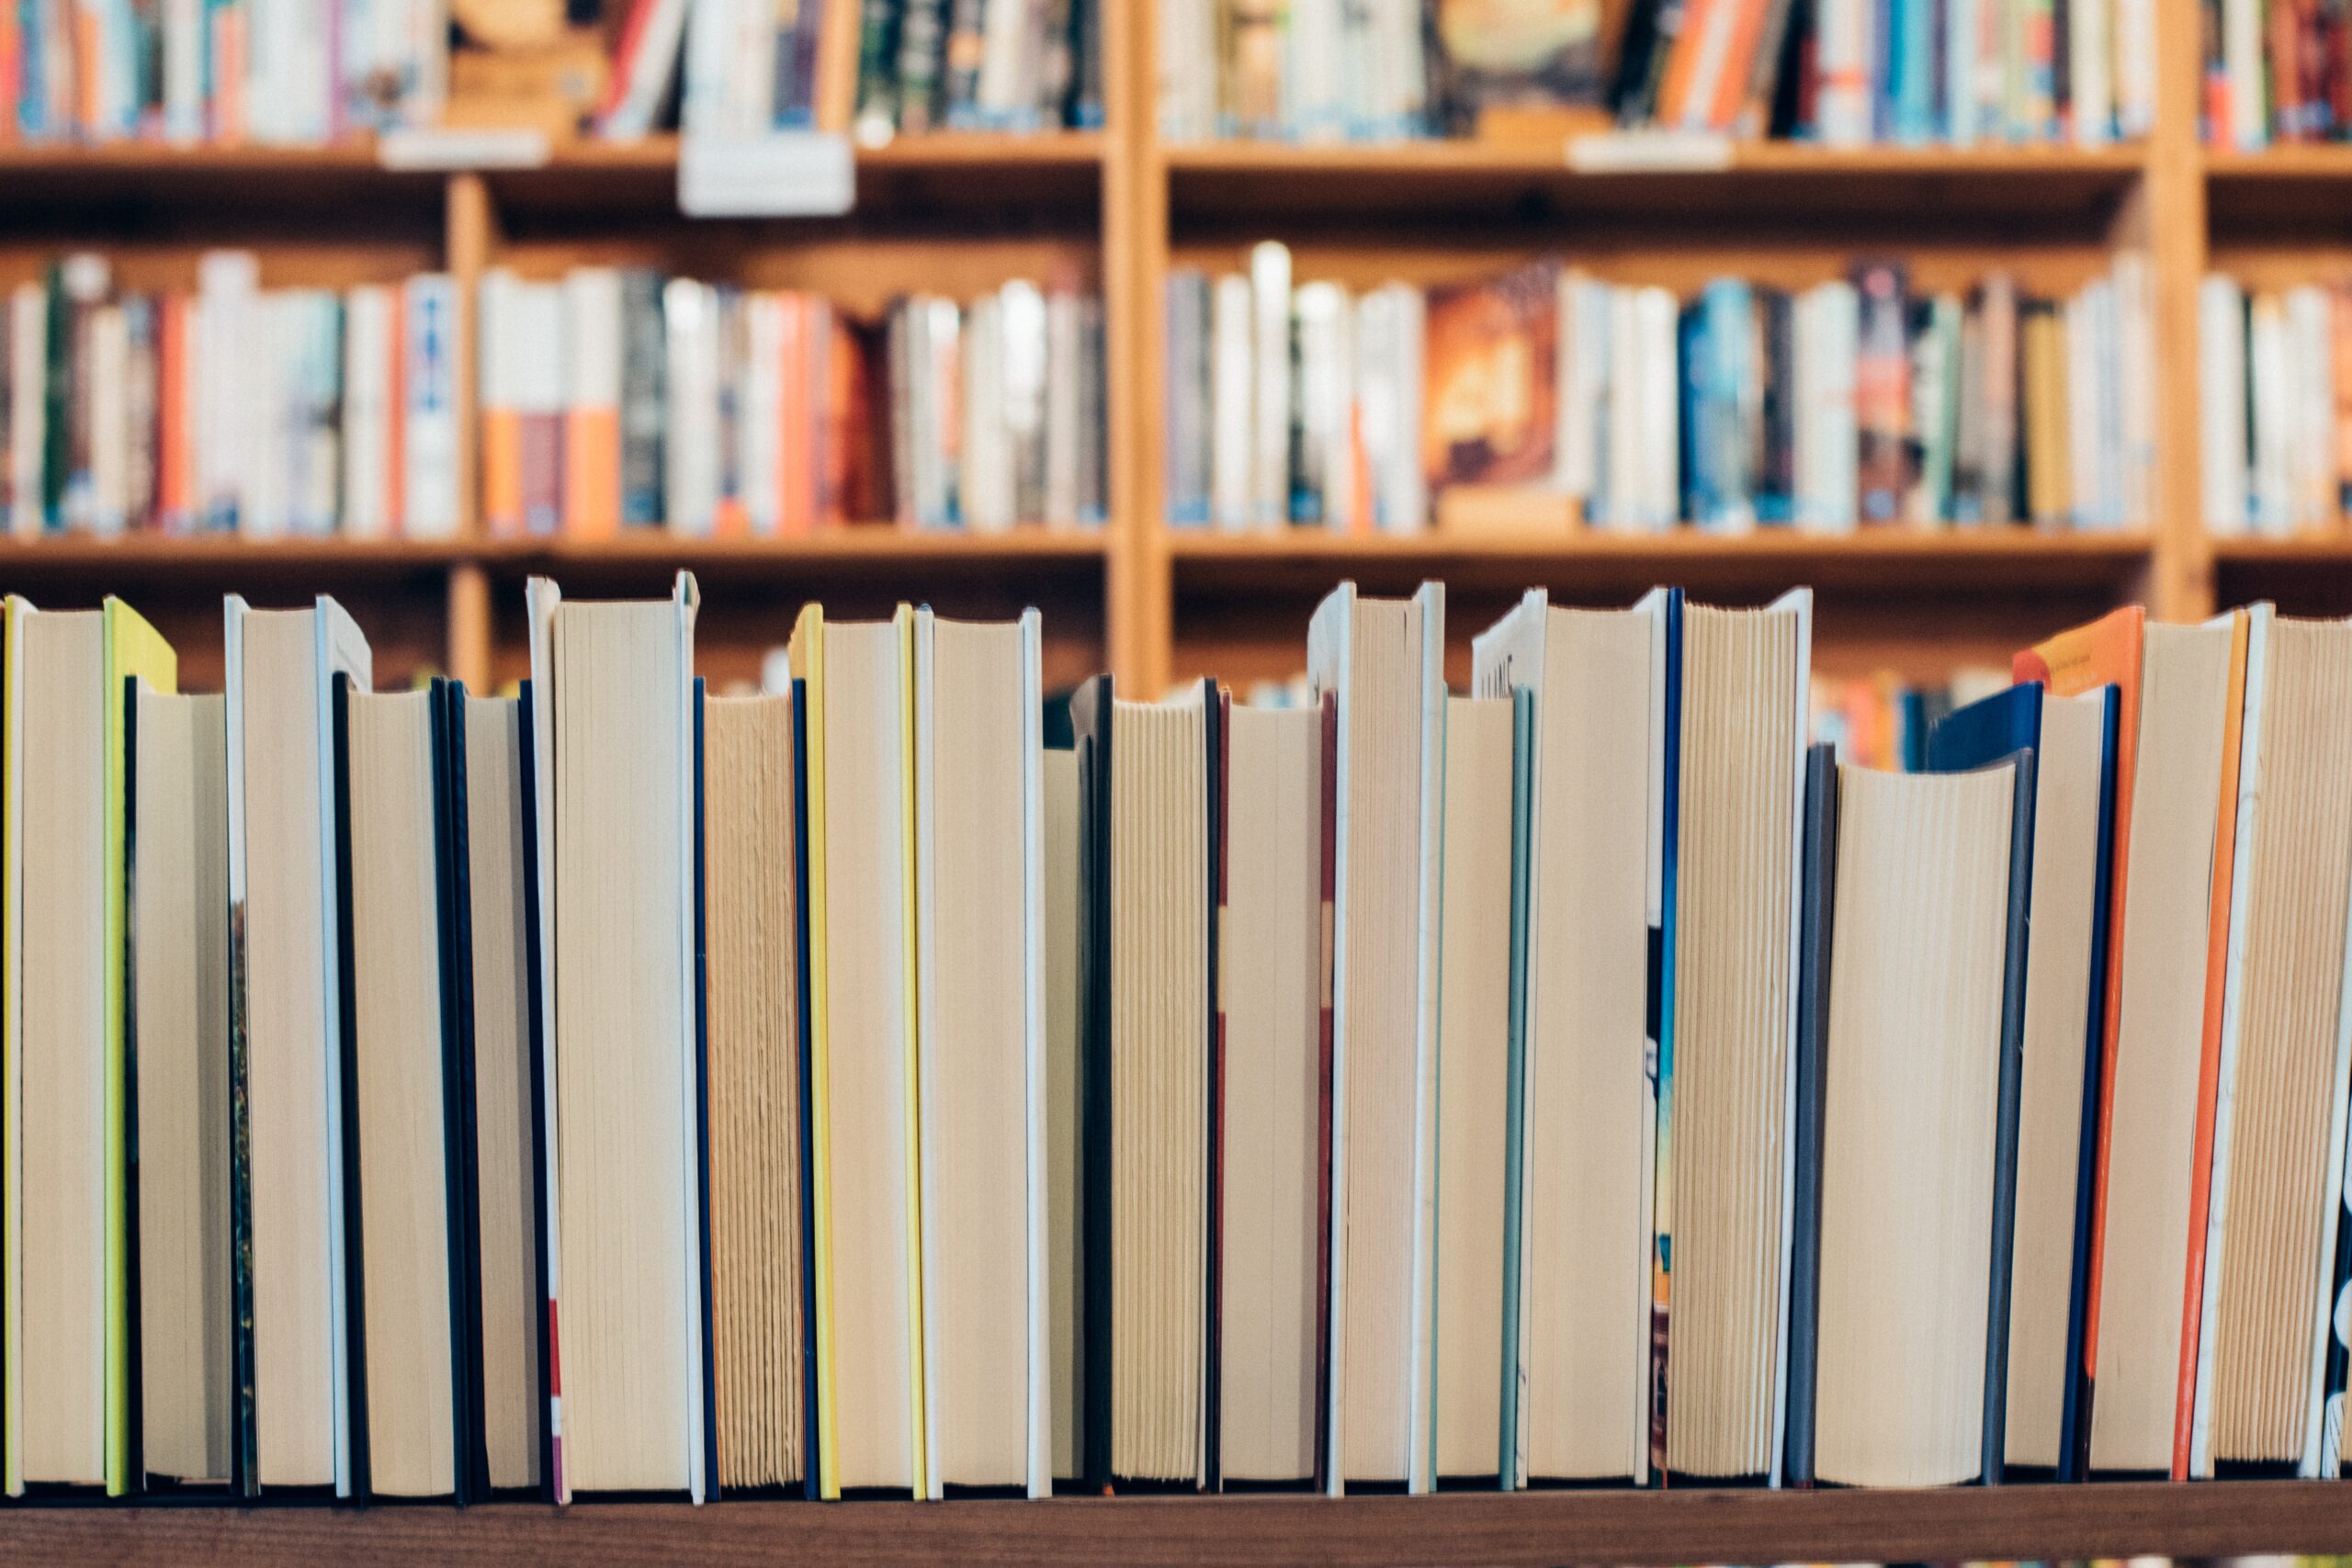 These books will help your job search, PhDs